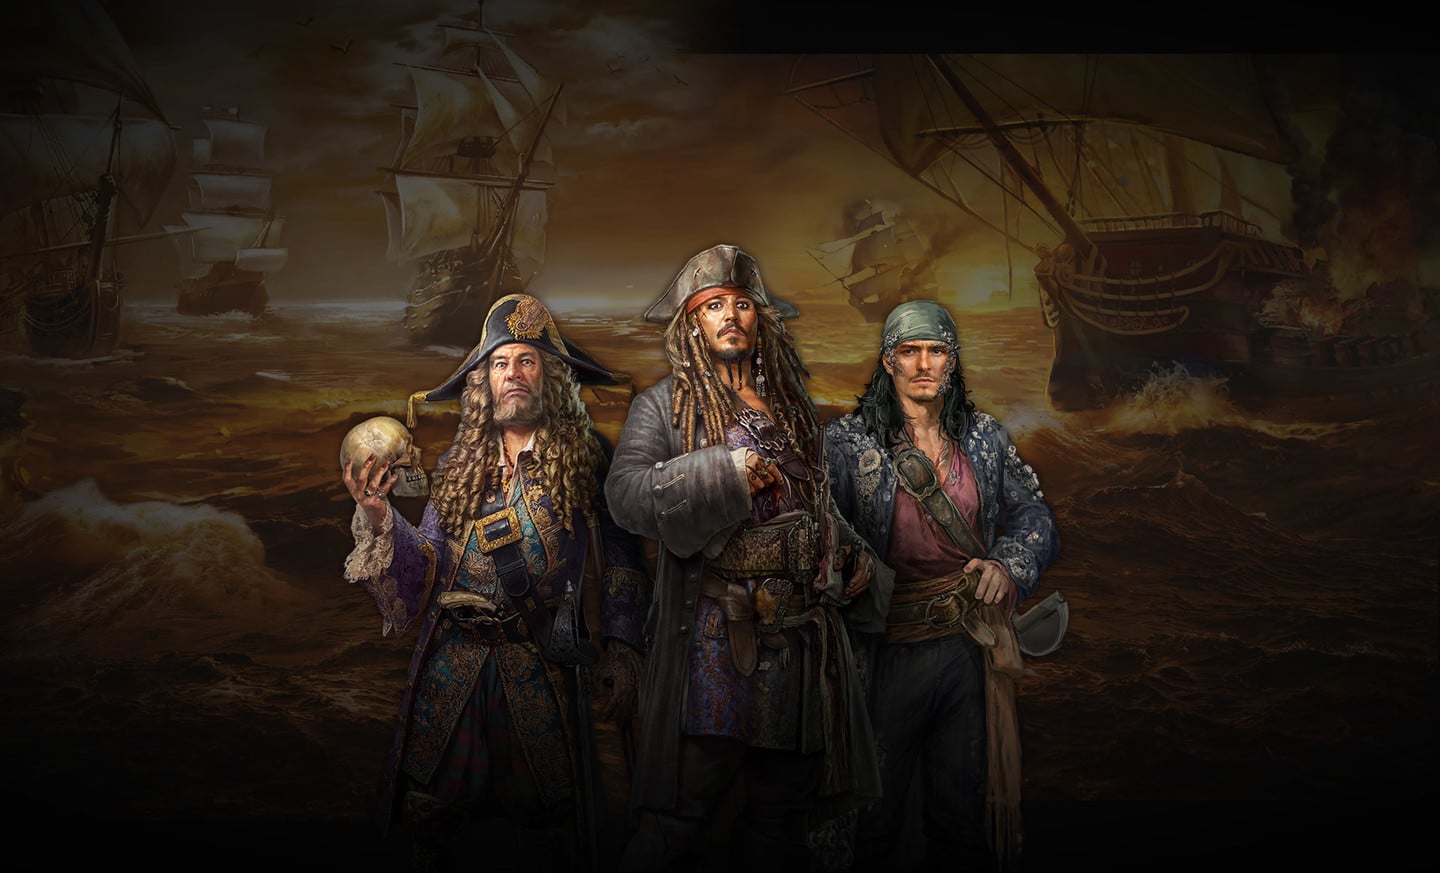 Pirates of the caribbean 3 free online